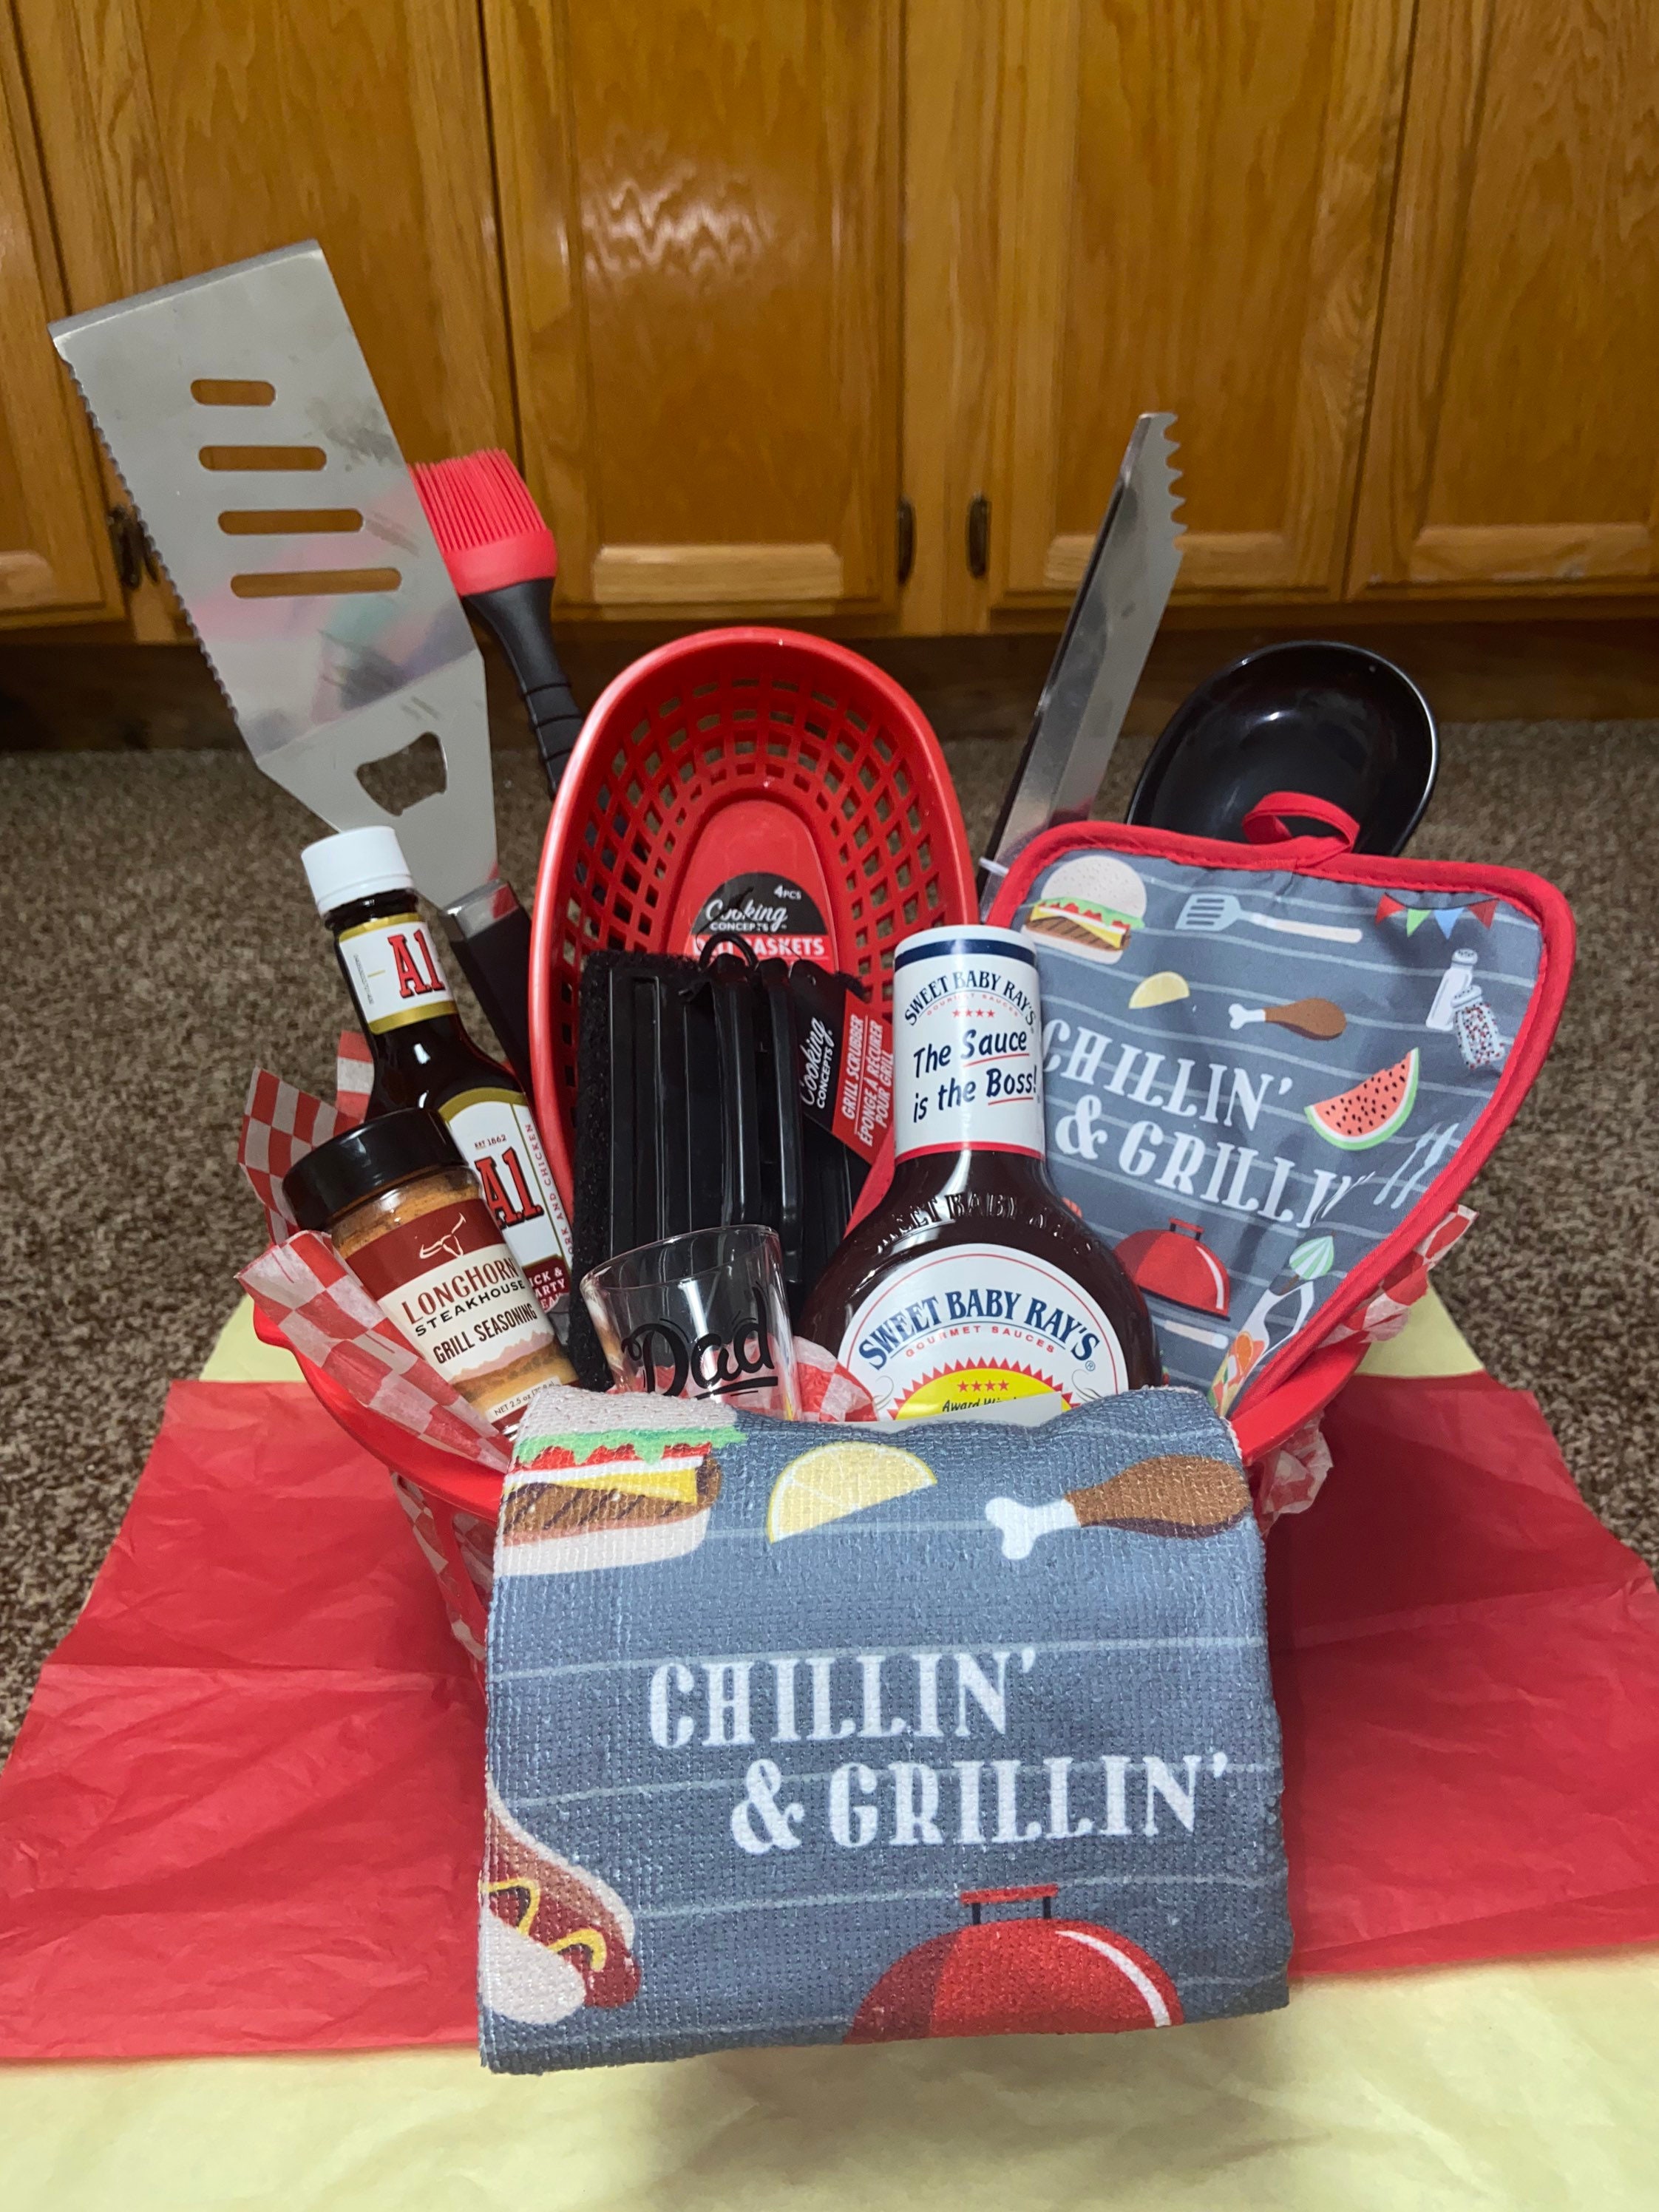  Rolling Grilling Baskets for Outdoor BBq Barbecue Women Men  Gifts Ideas for Grandpa Dad Father Day Husband Brother Uncle Godfather Boss  Him Wife Thank You Appreciation Retirement Who Like to